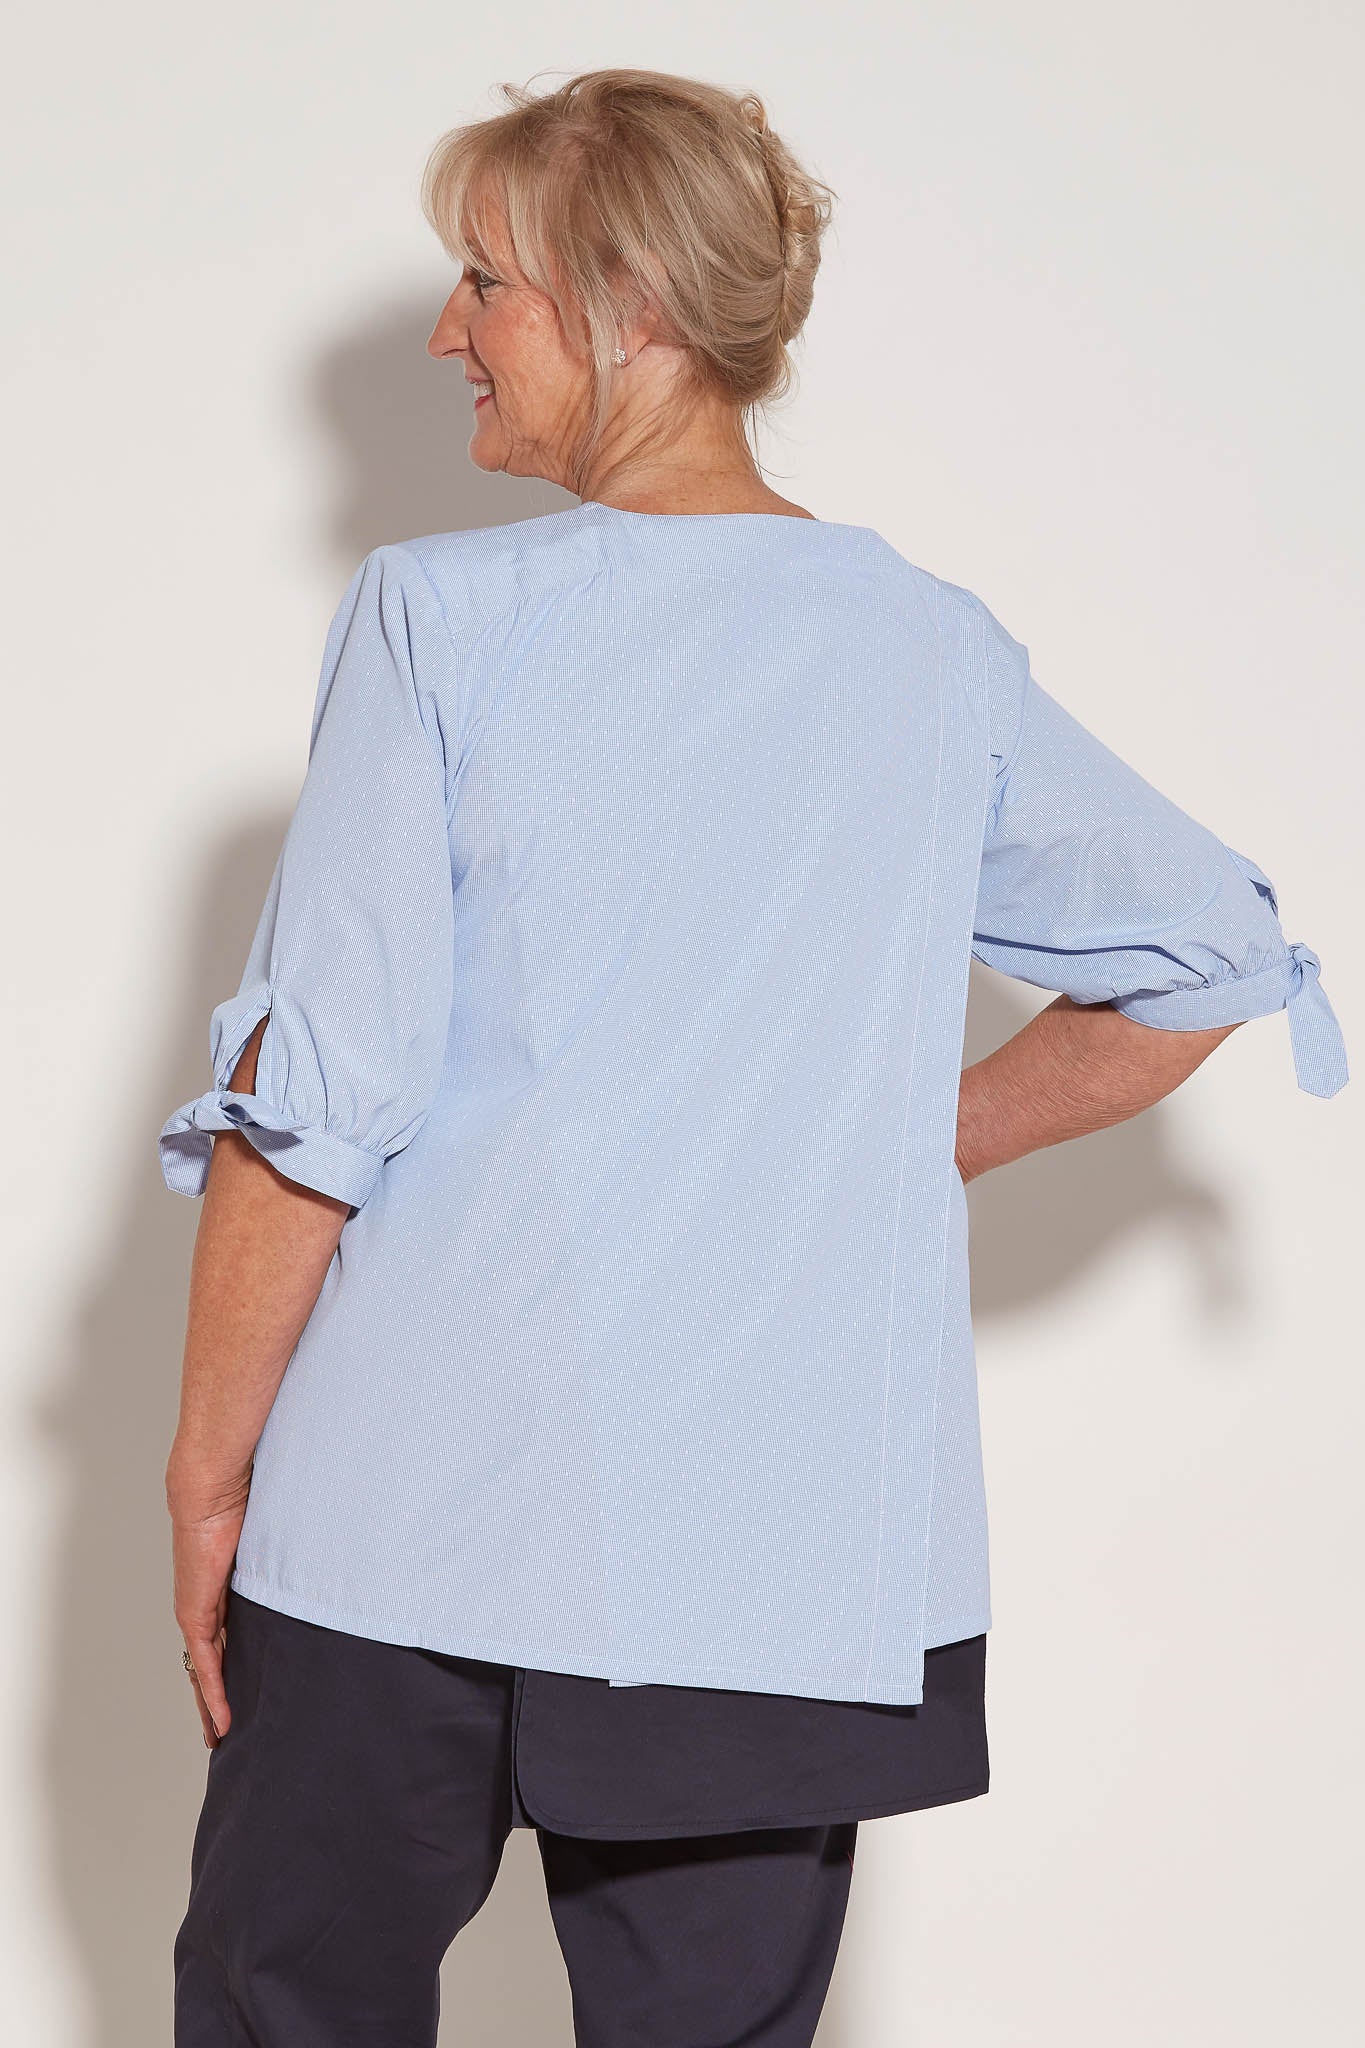 Blouse for Women - Blue | Dolly | Adaptive Clothing by Ovidis